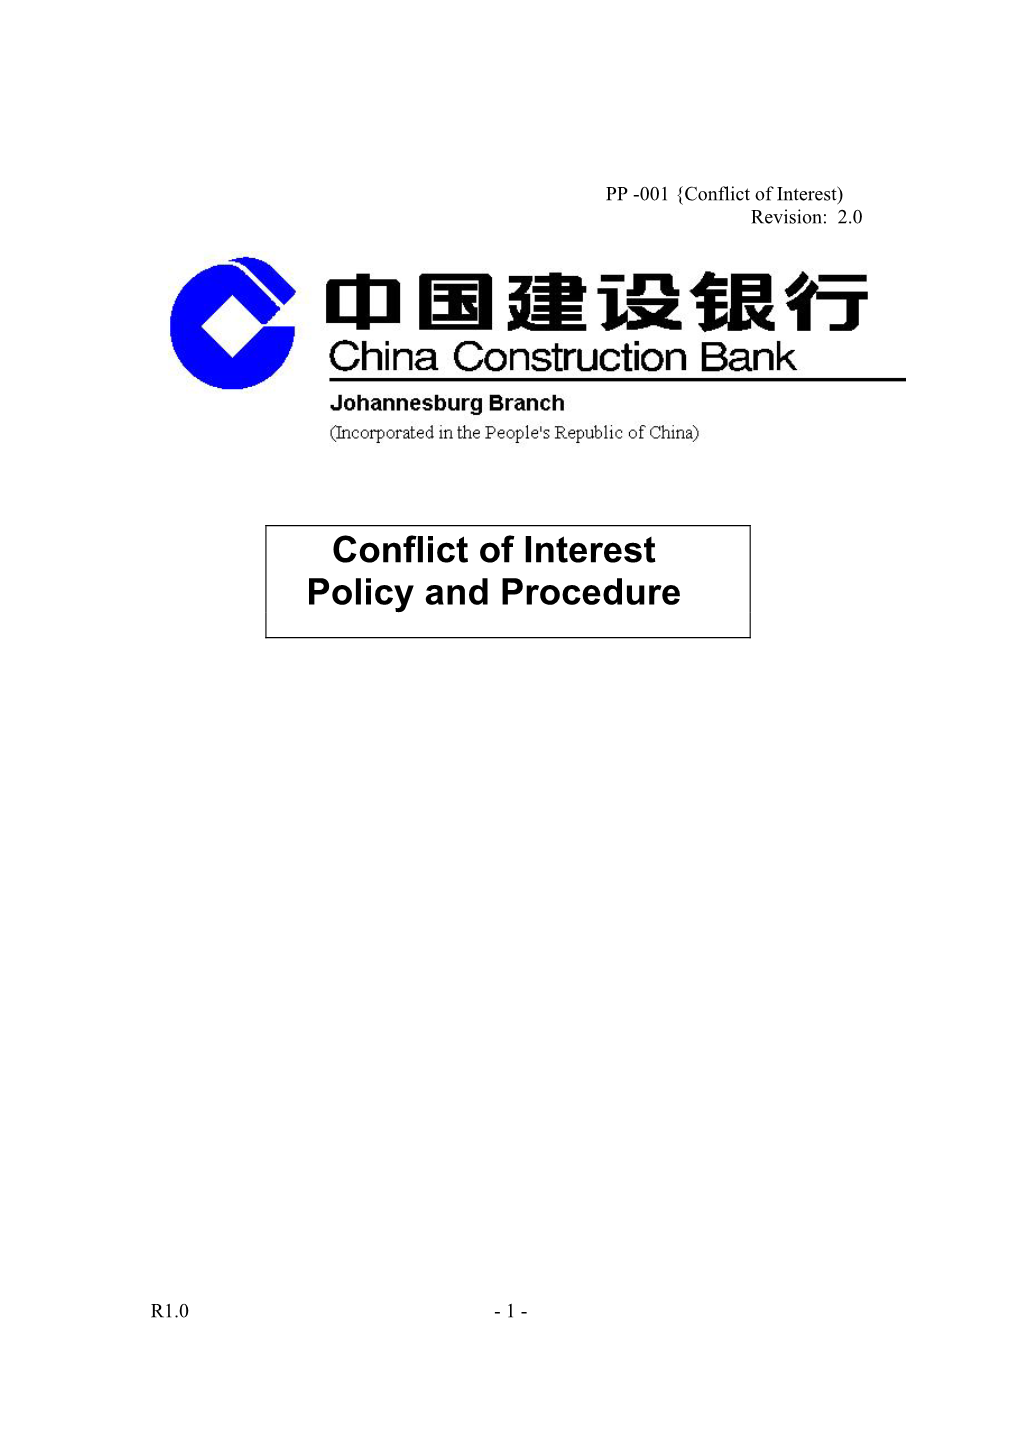 Conflict of Interest Policy and Procedure